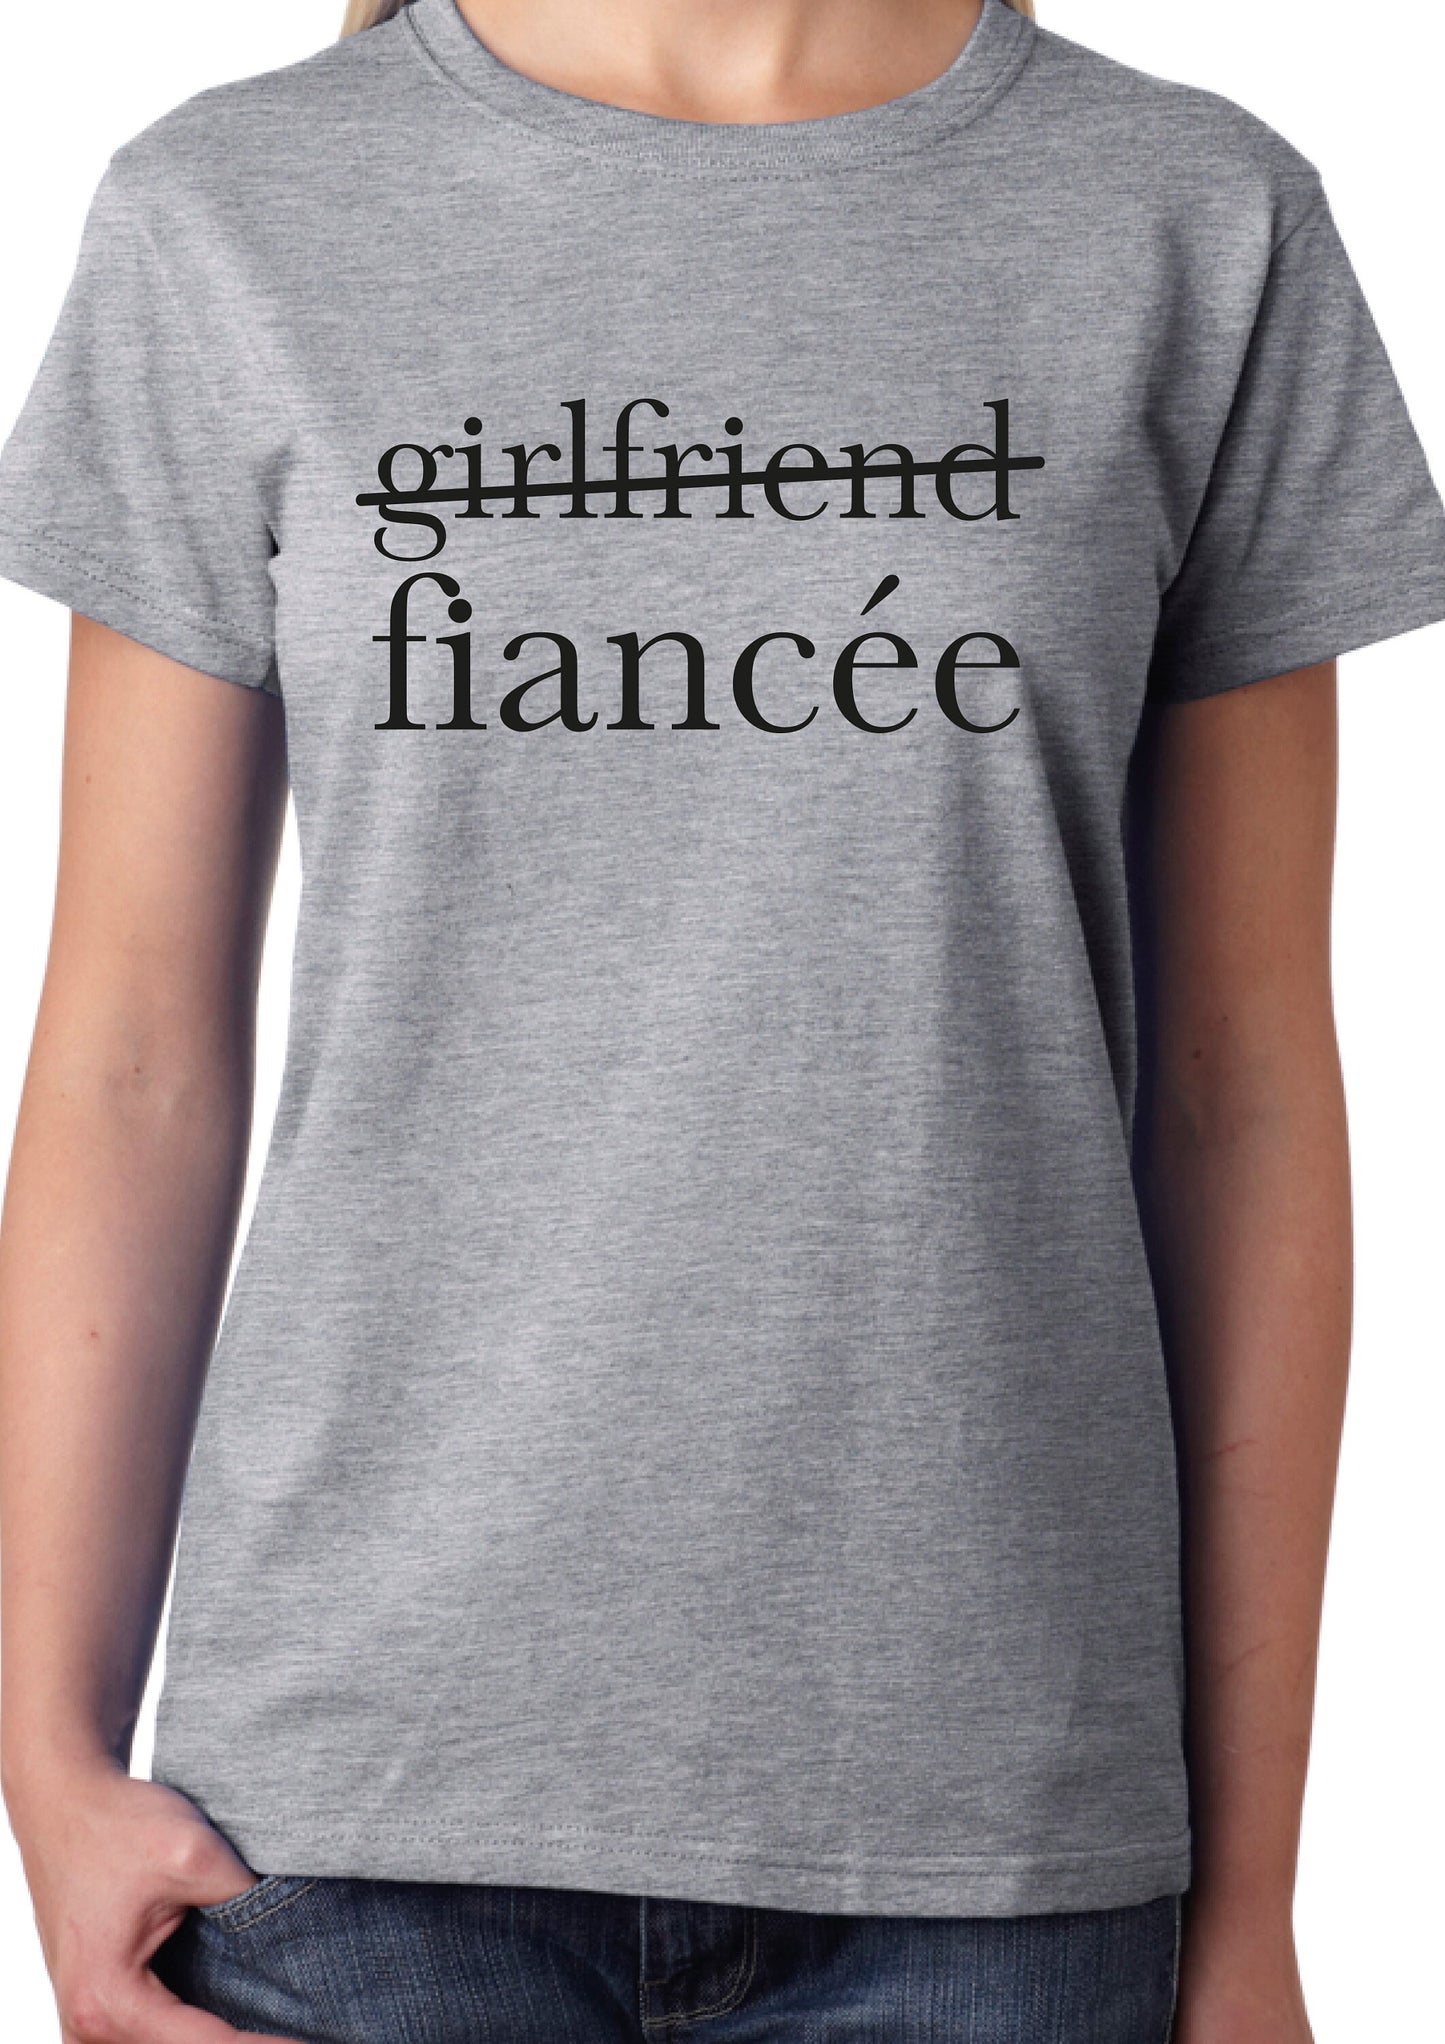 Girlfriend / Fiance T-Shirt, Ladies or Unisex Funny Cool Engagement Gift